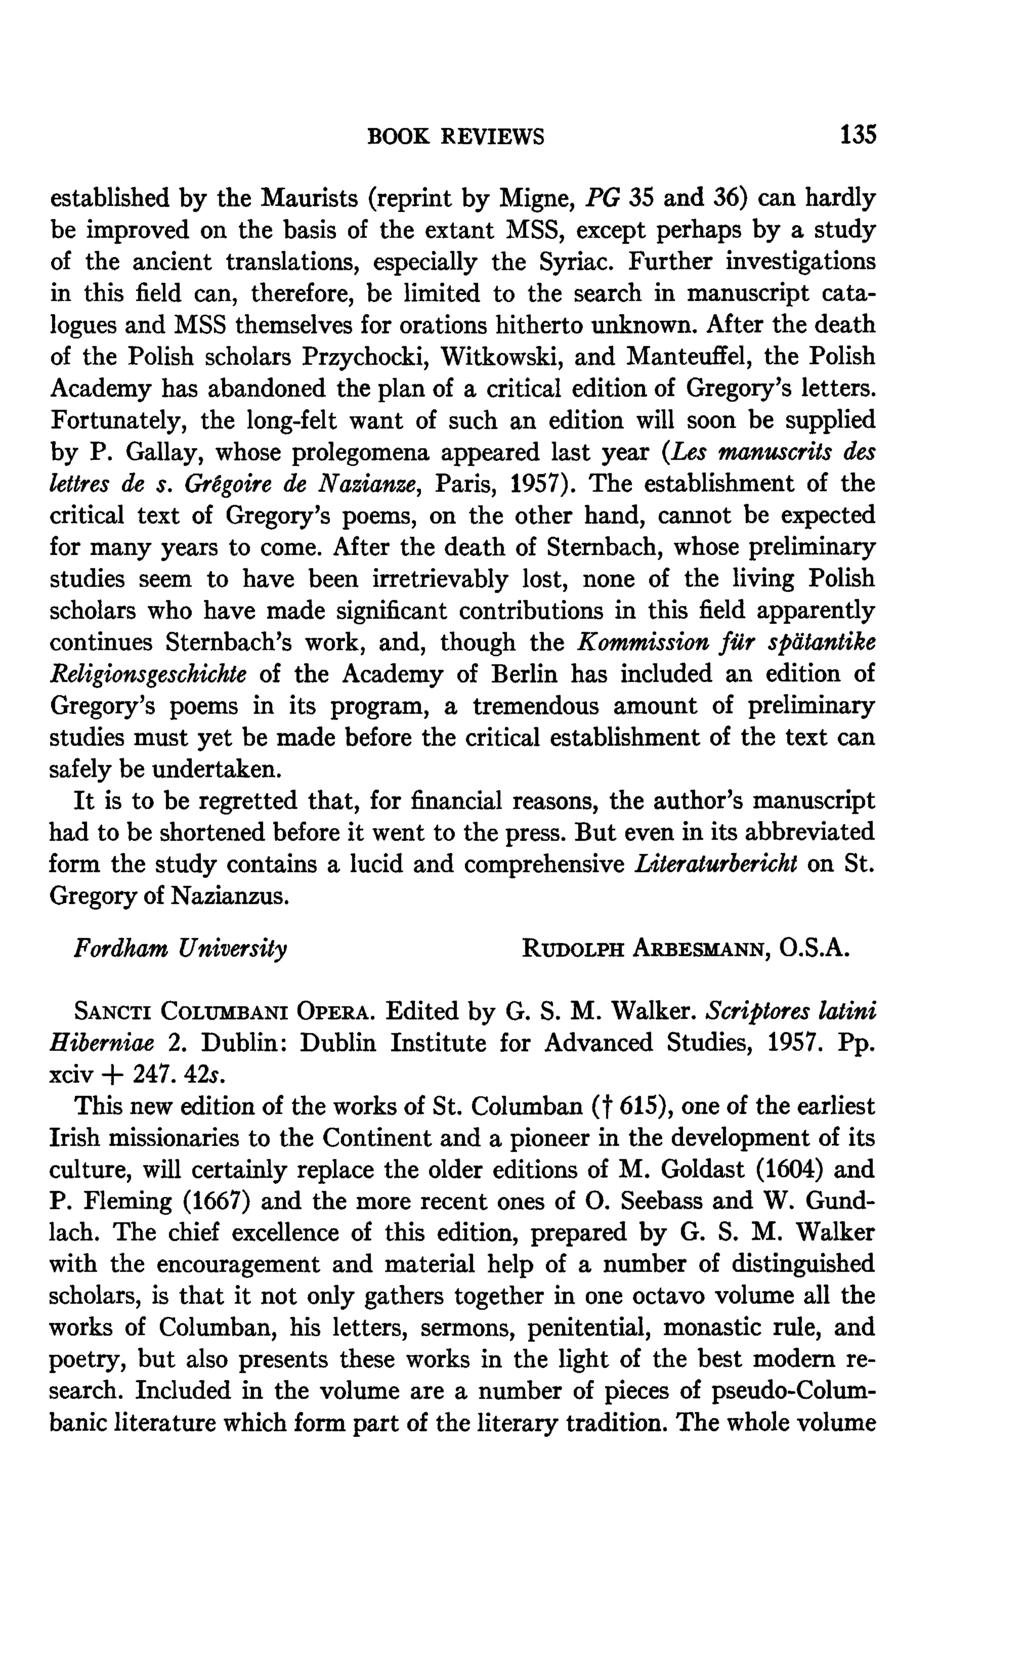 BOOK REVIEWS 135 established by the Maurists (reprint by Migne, PG 35 and 36) can hardly be improved on the basis of the extant MSS, except perhaps by a study of the ancient translations, especially